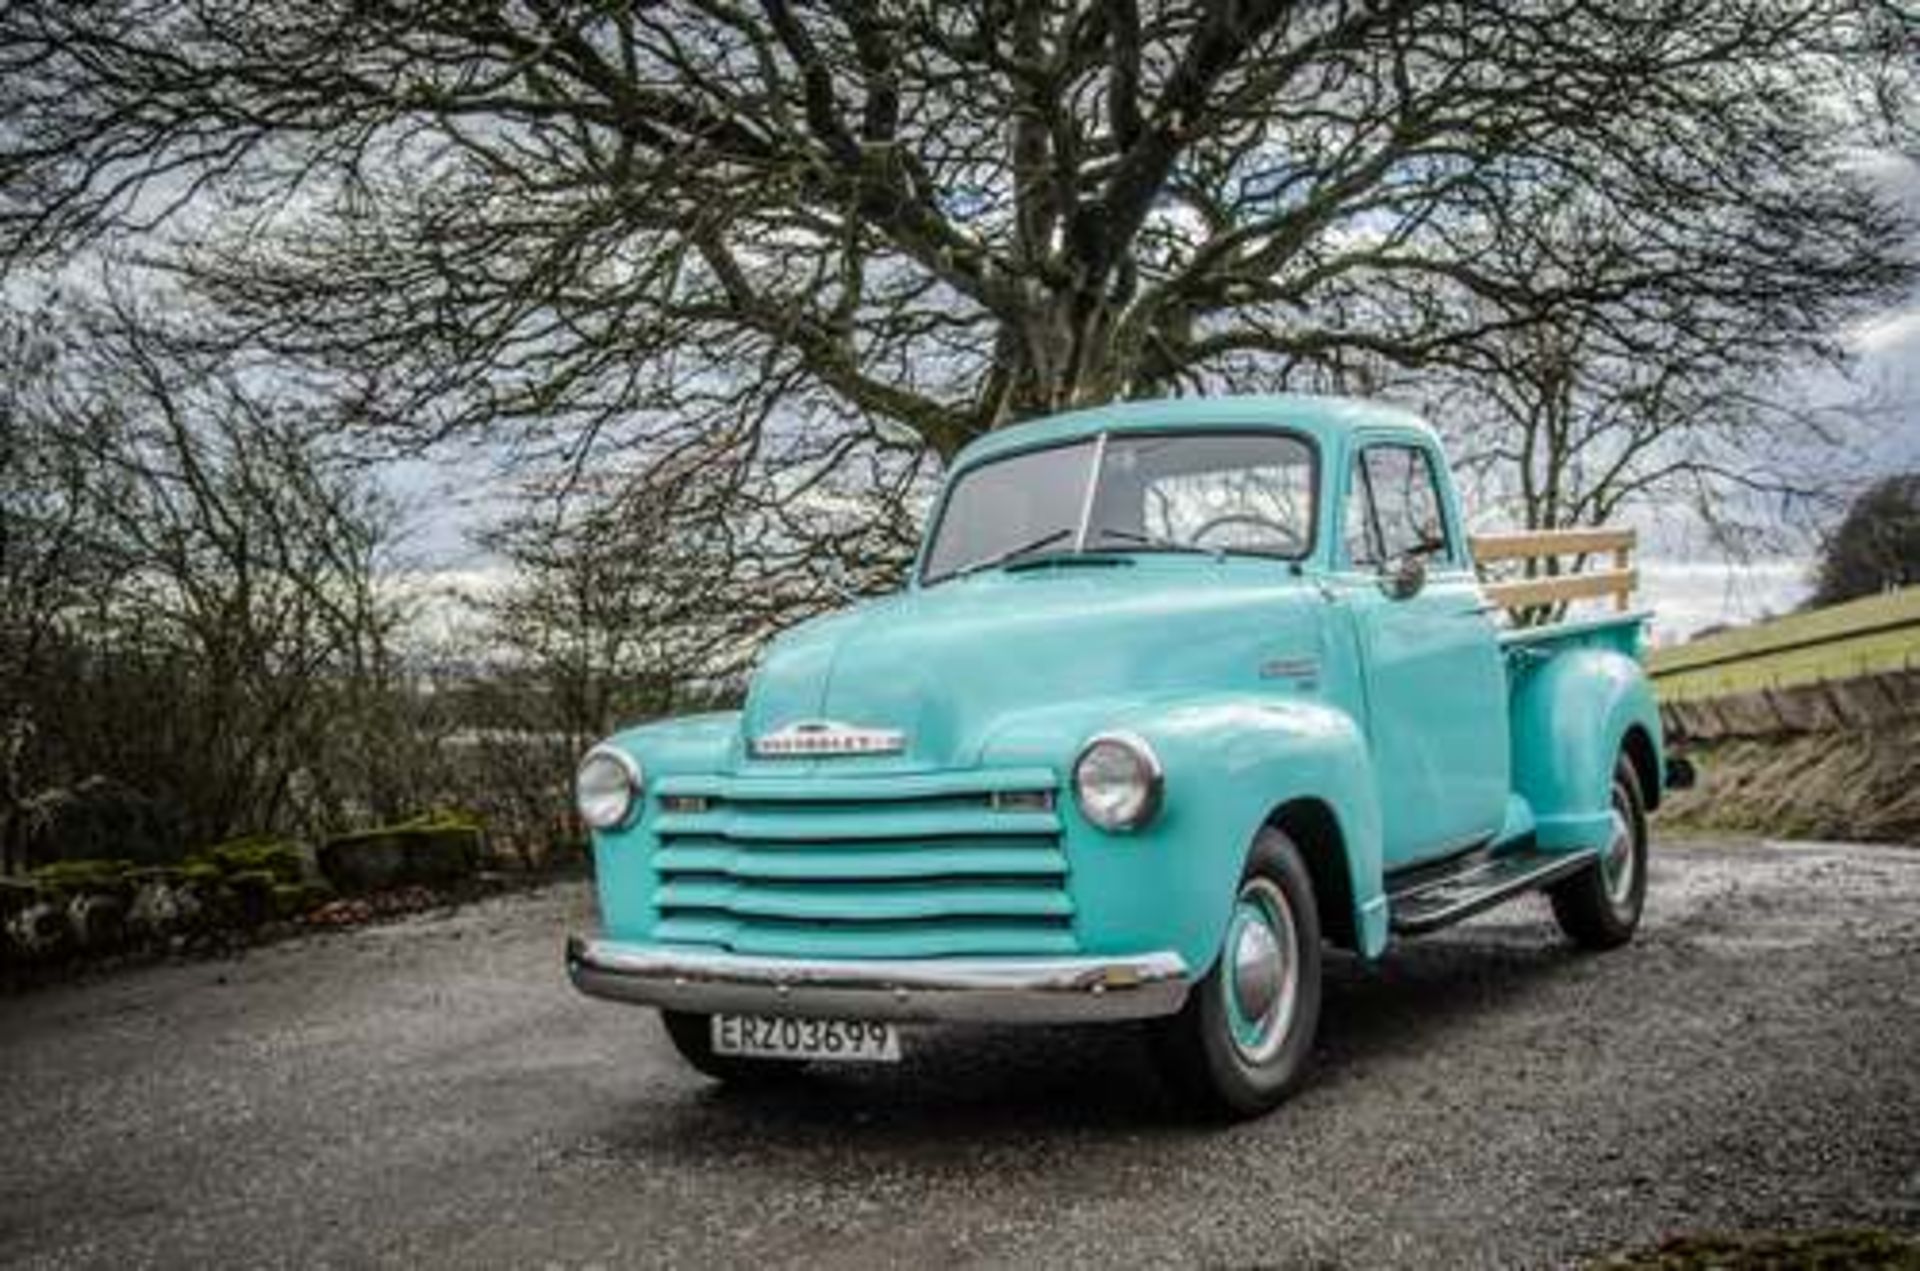 CHEVROLET 3100 PICK UP - 3500cc - Image 4 of 16